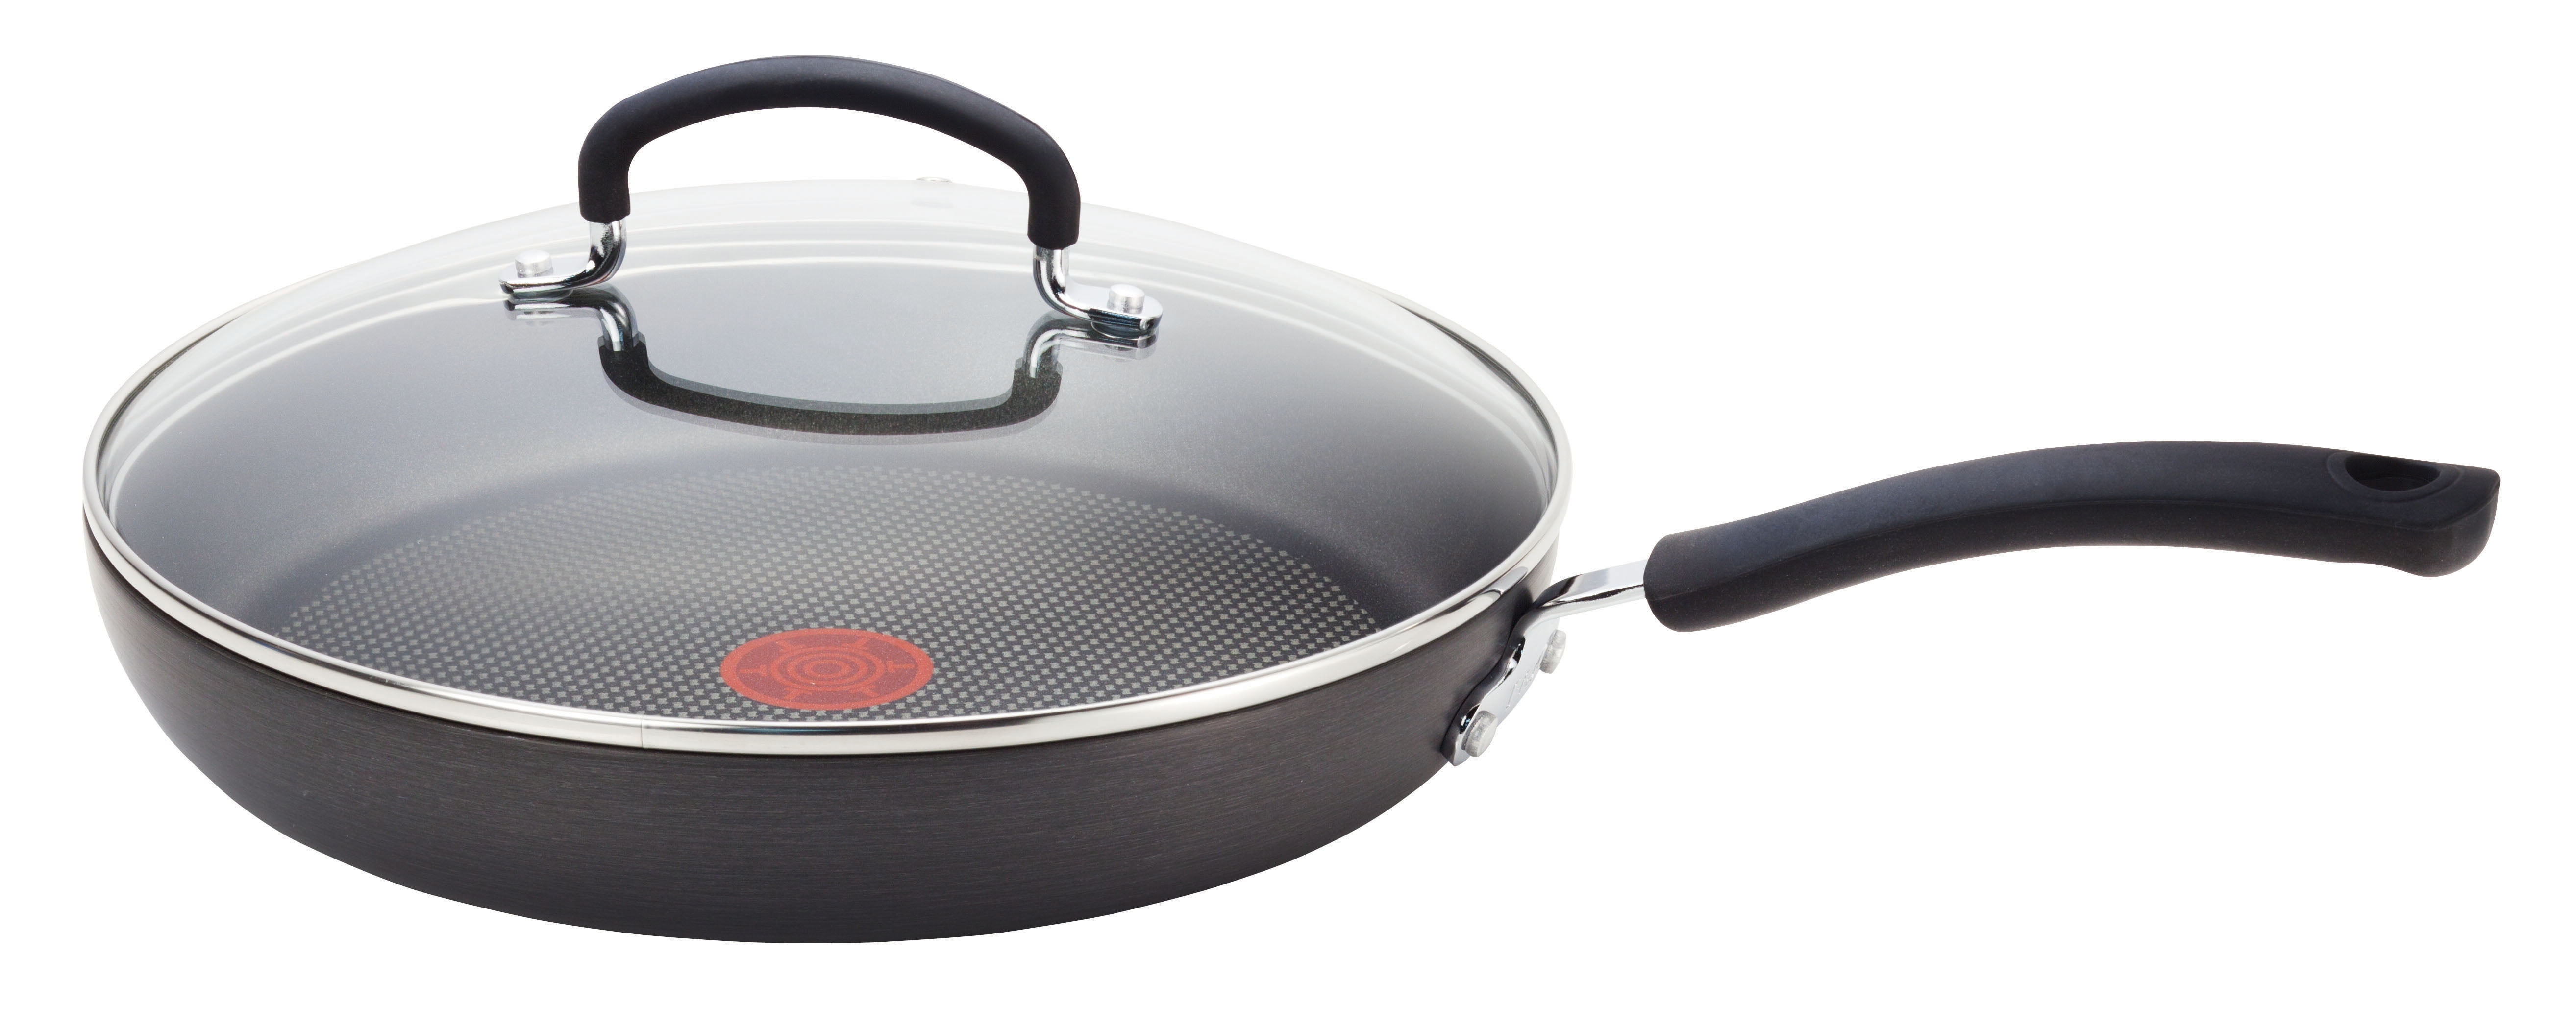  T-fal Ultimate Hard Anodized Nonstick Cookware Set 12